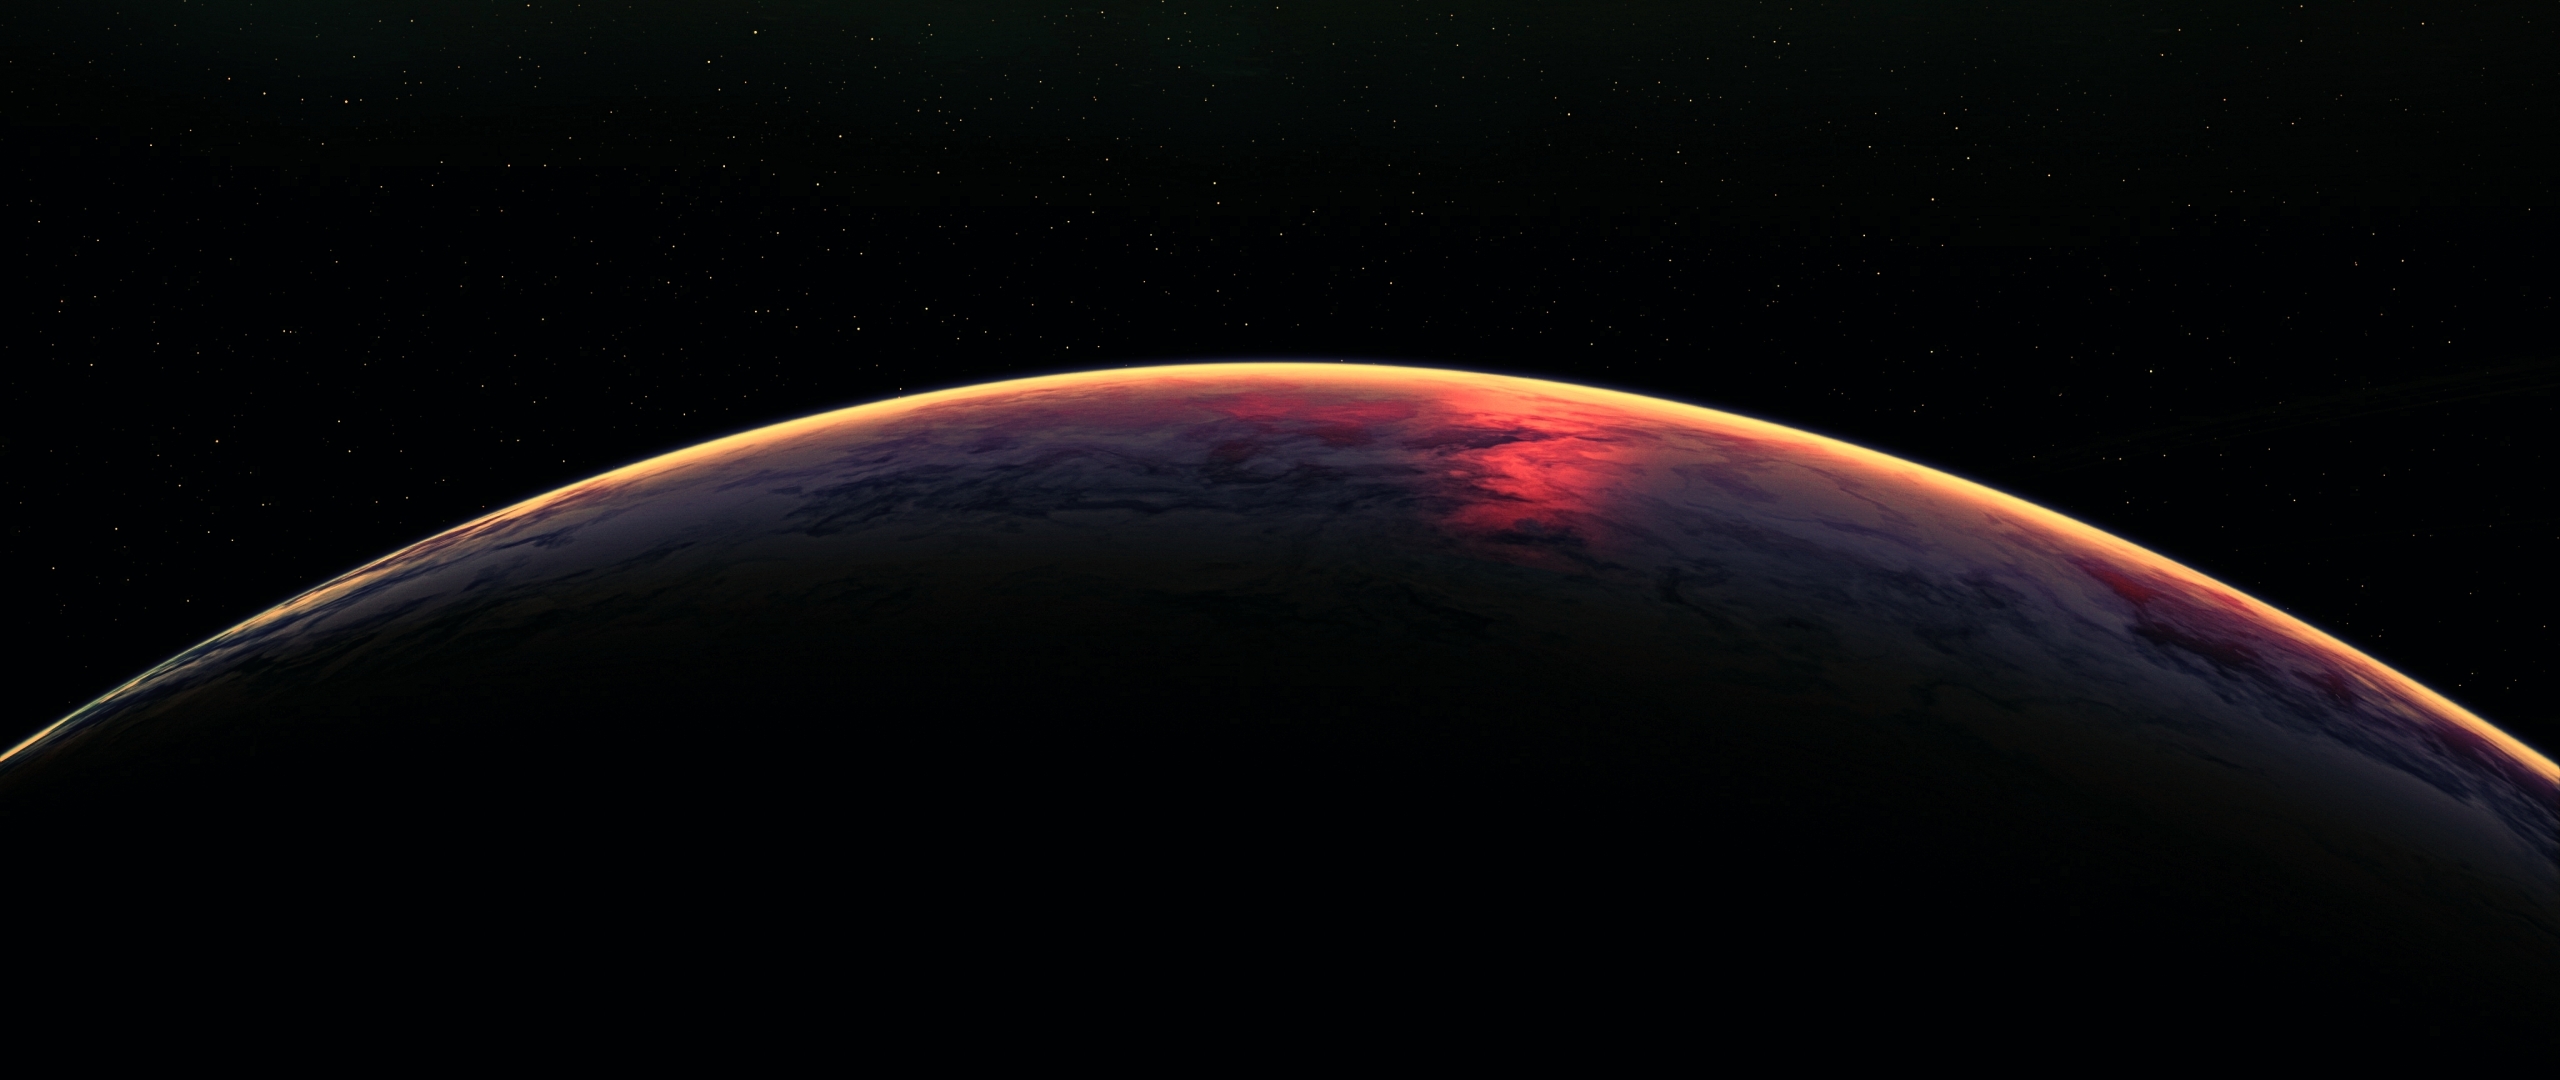 A planet with a red and orange atmosphere, with a starry background. - Earth